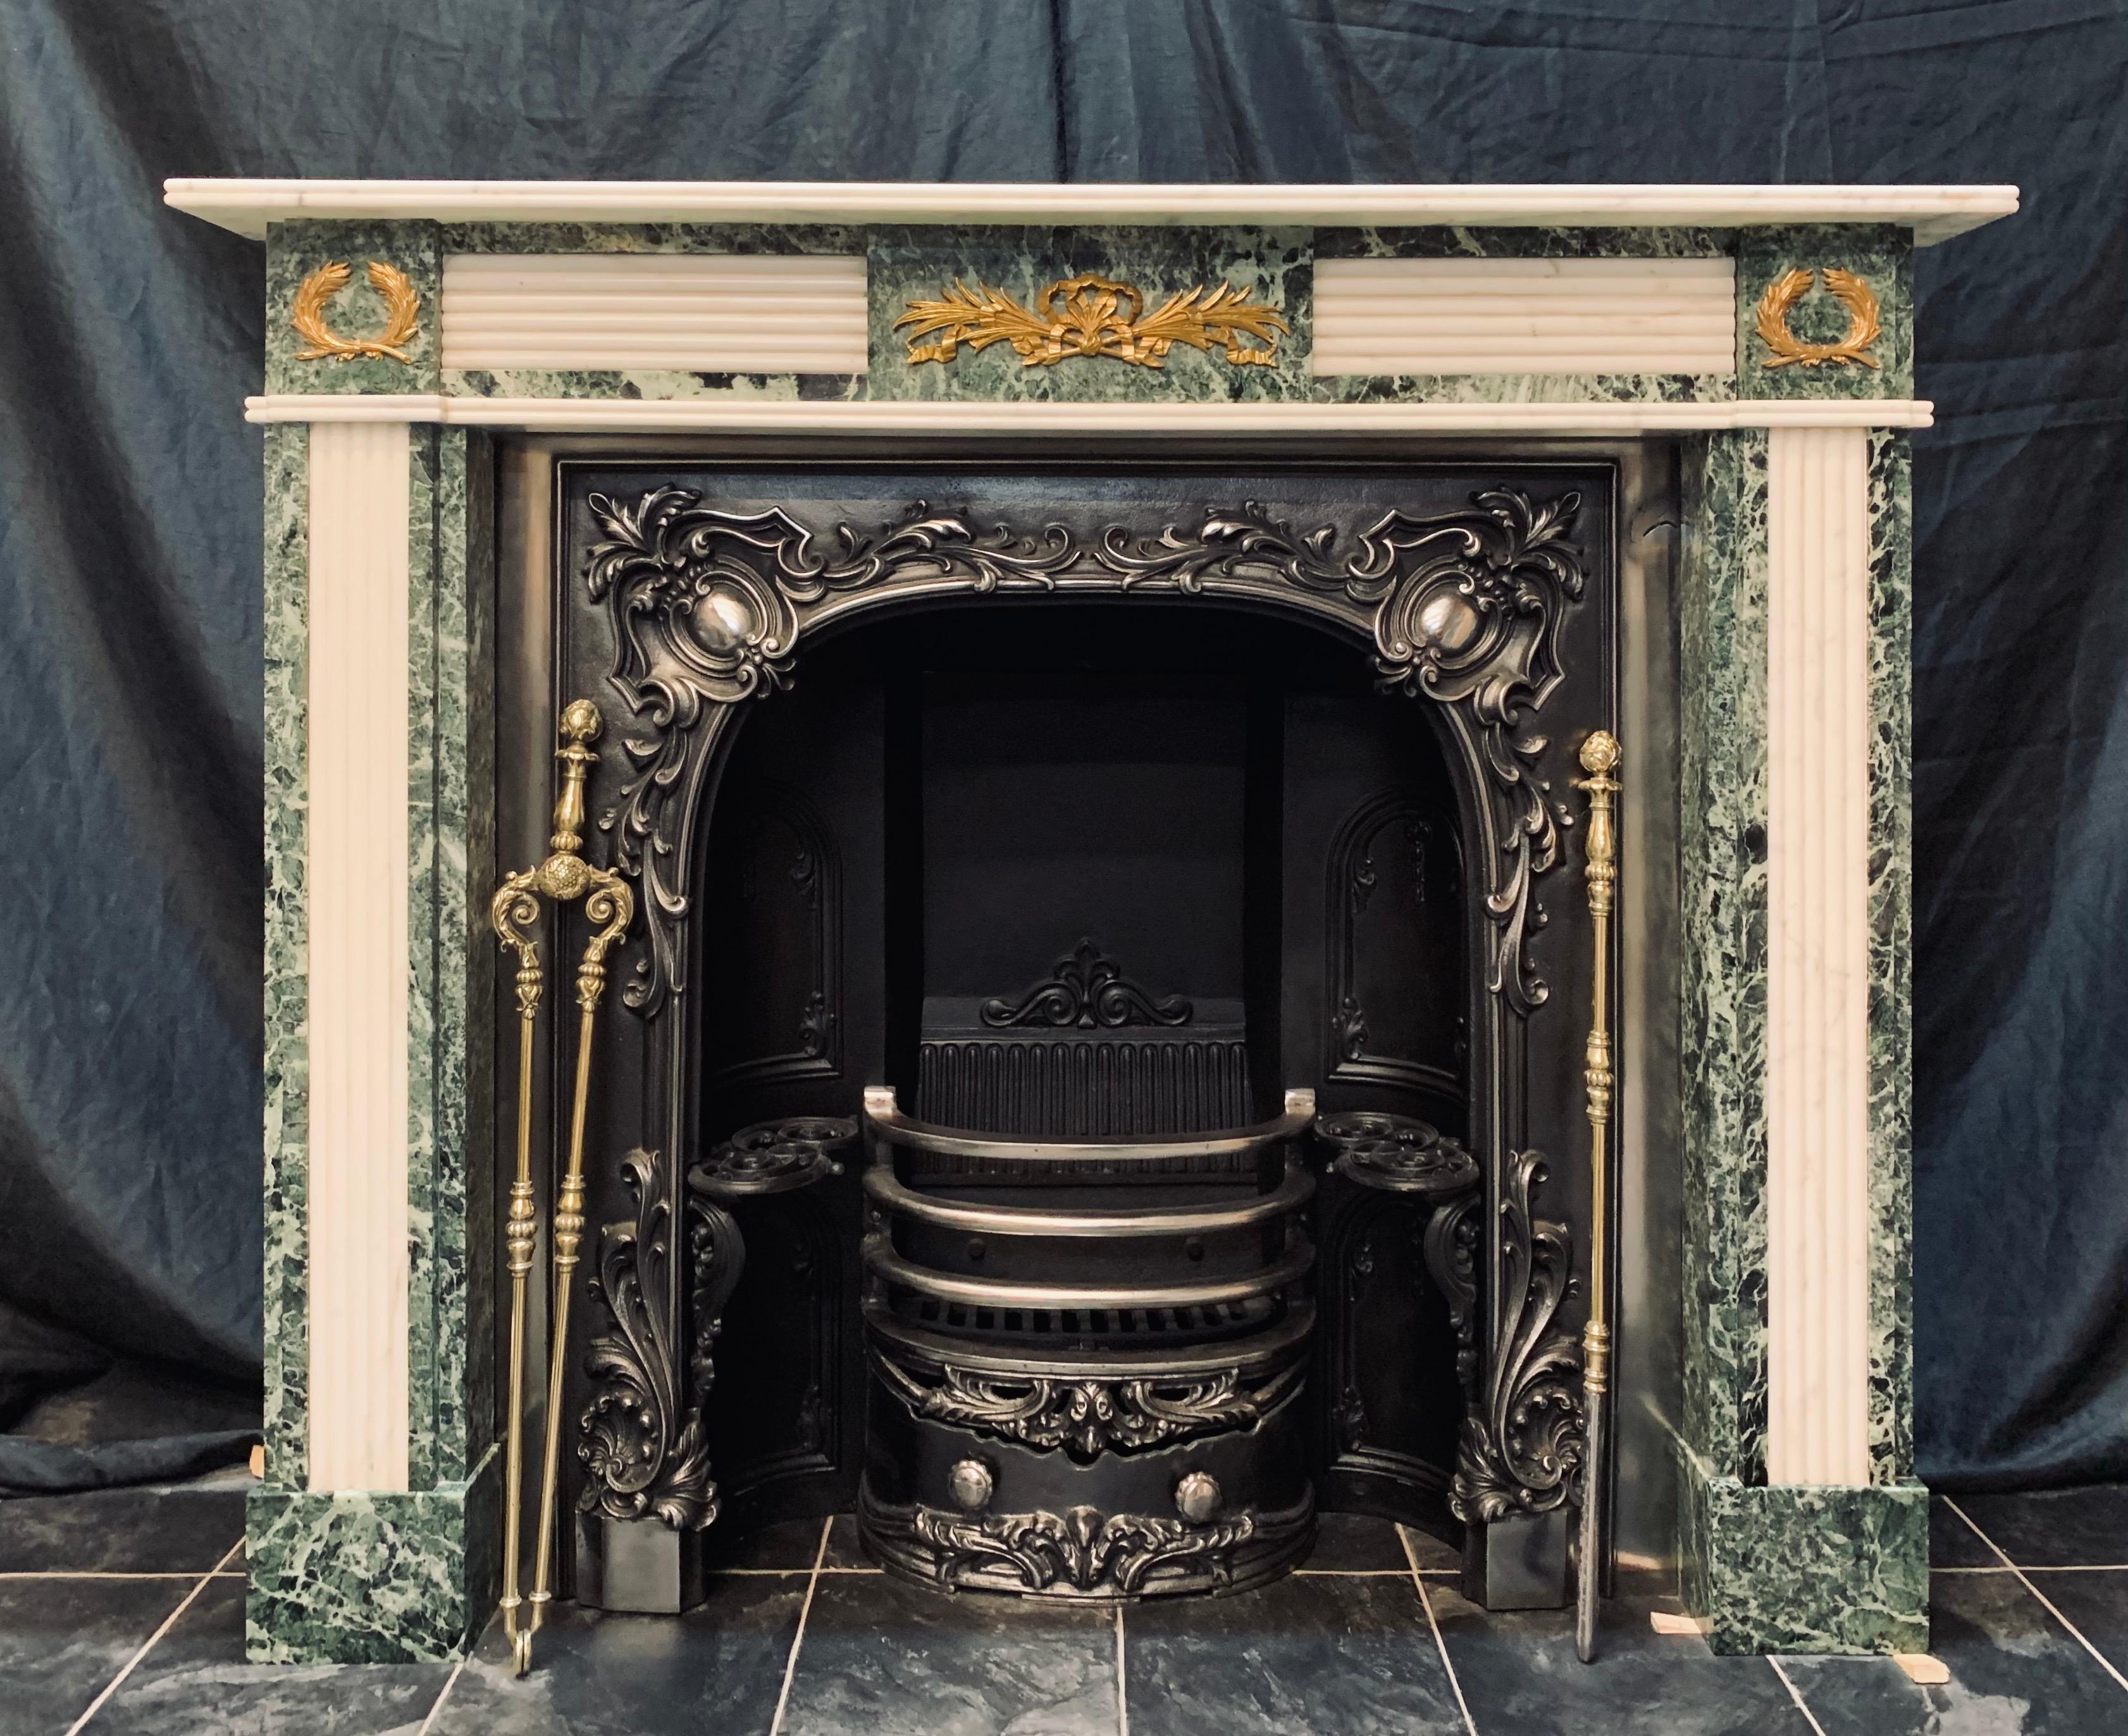 An elegant and detailed Regency style richly veined Verde Tinos & Statuary marble fireplace surround with bronze ormolu mounts. A reeded top shelf sits above a frieze hosting a central tablet with a symmetrical bronze ormolu mount, flanked by